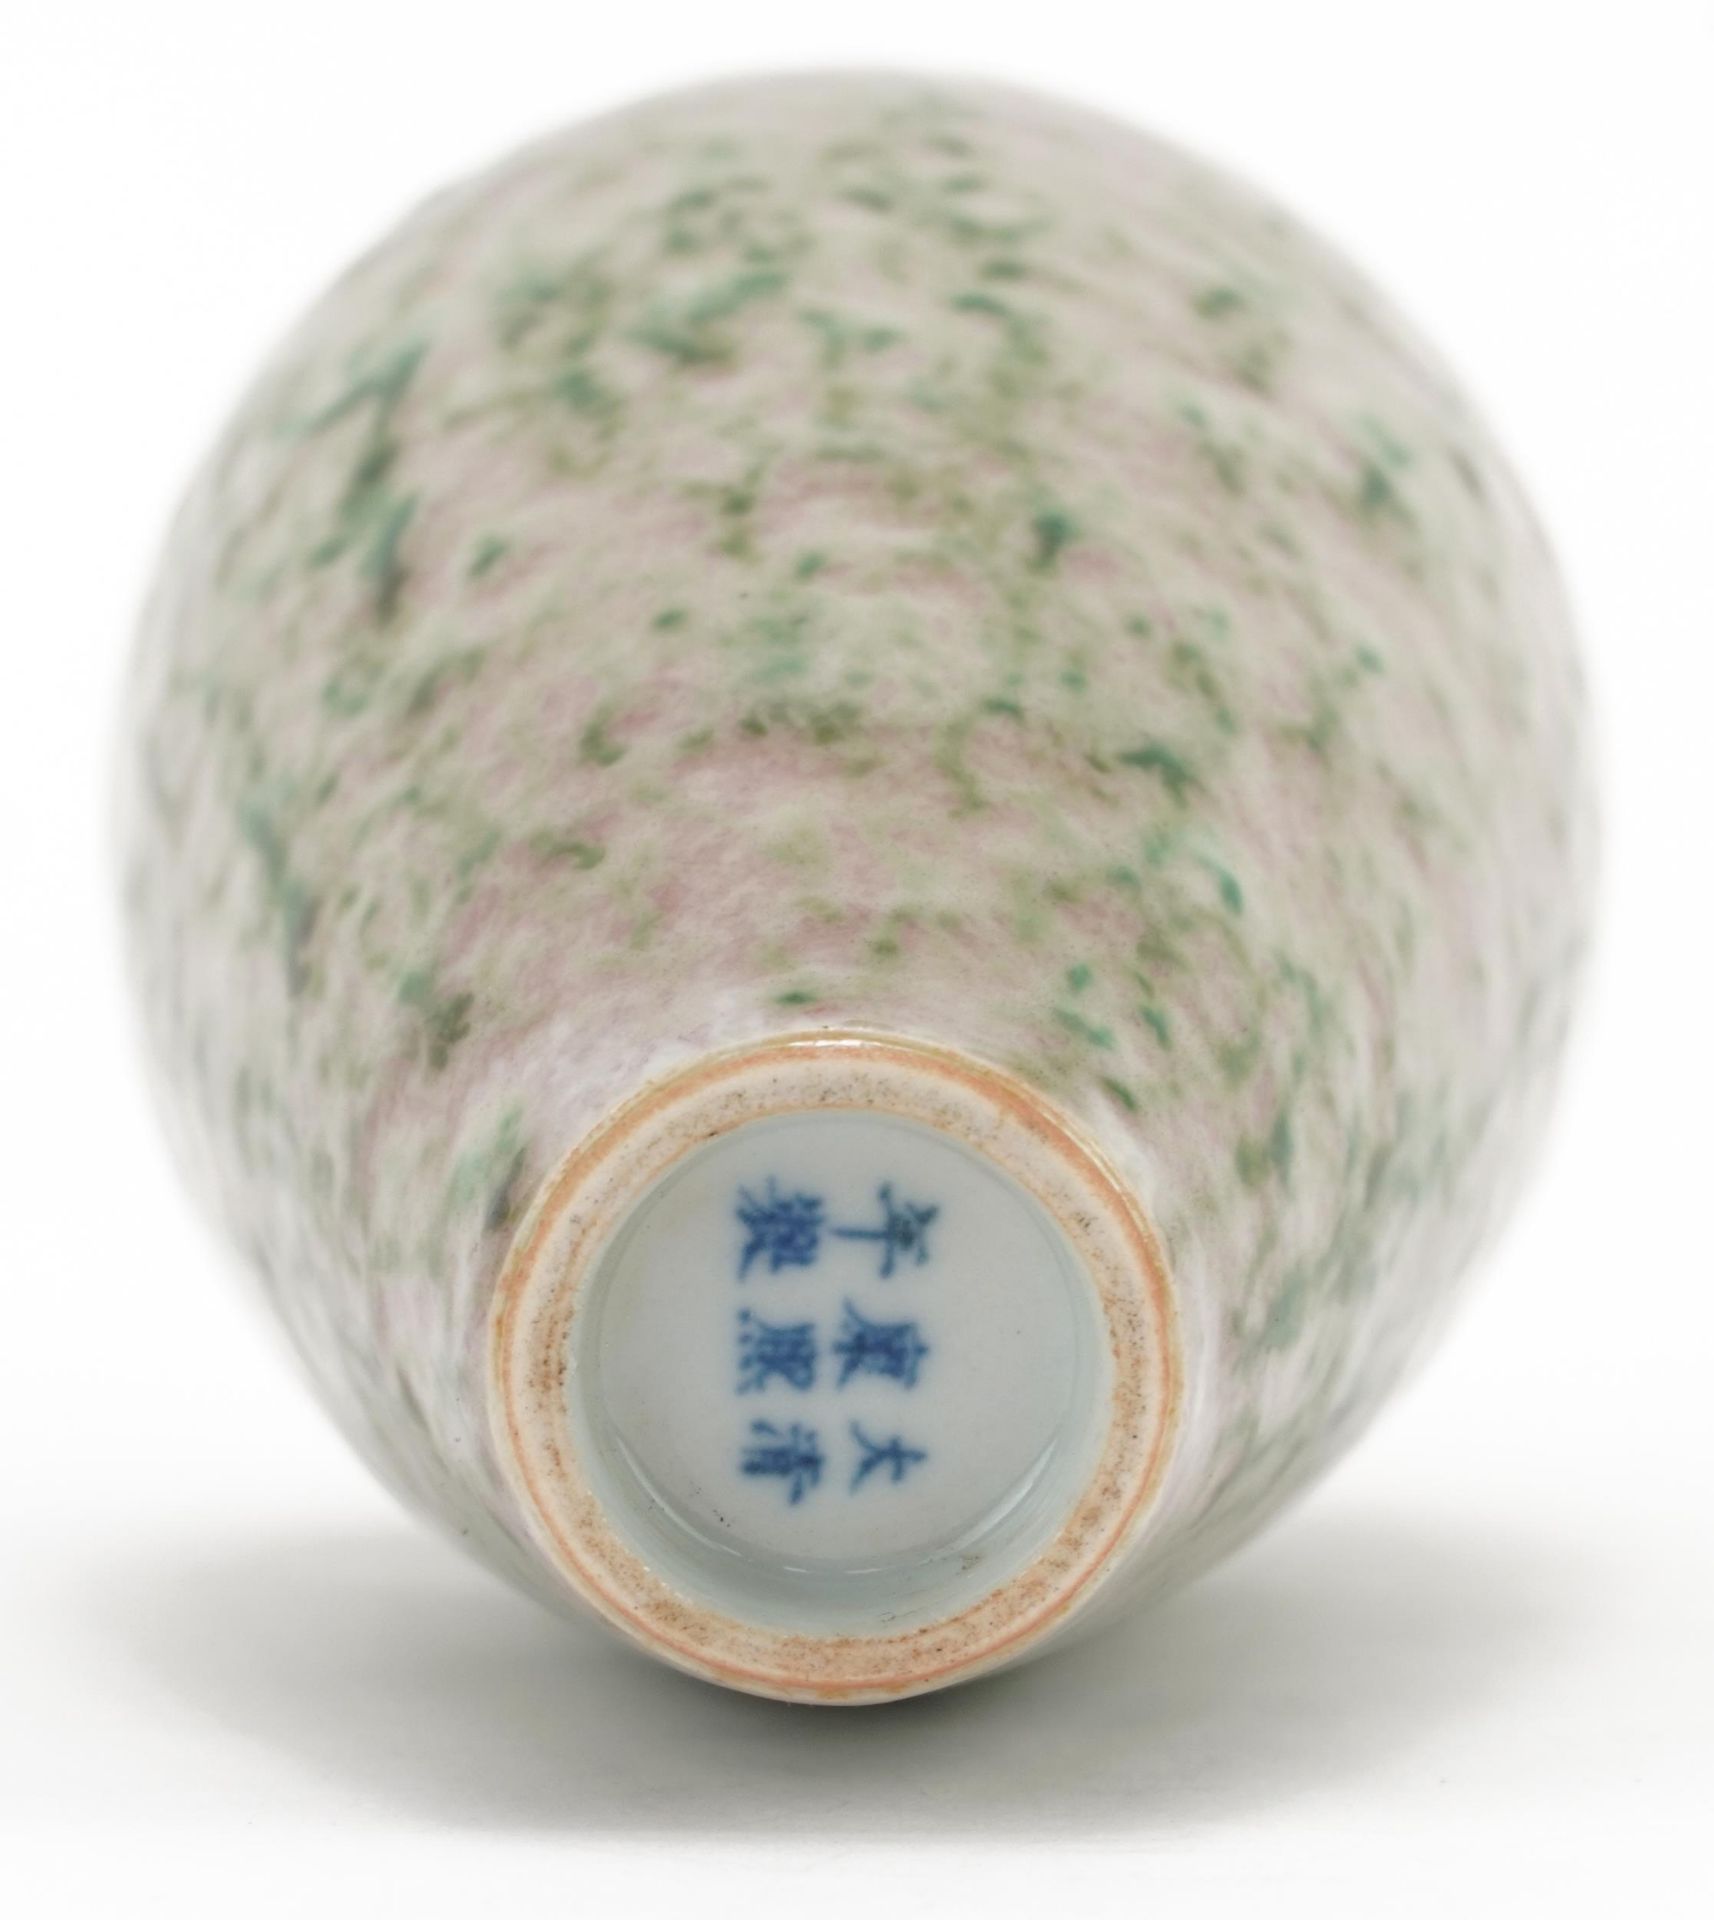 Chinese porcelain vase having a spotted green and red glaze, six figure character marks to the base - Image 5 of 8